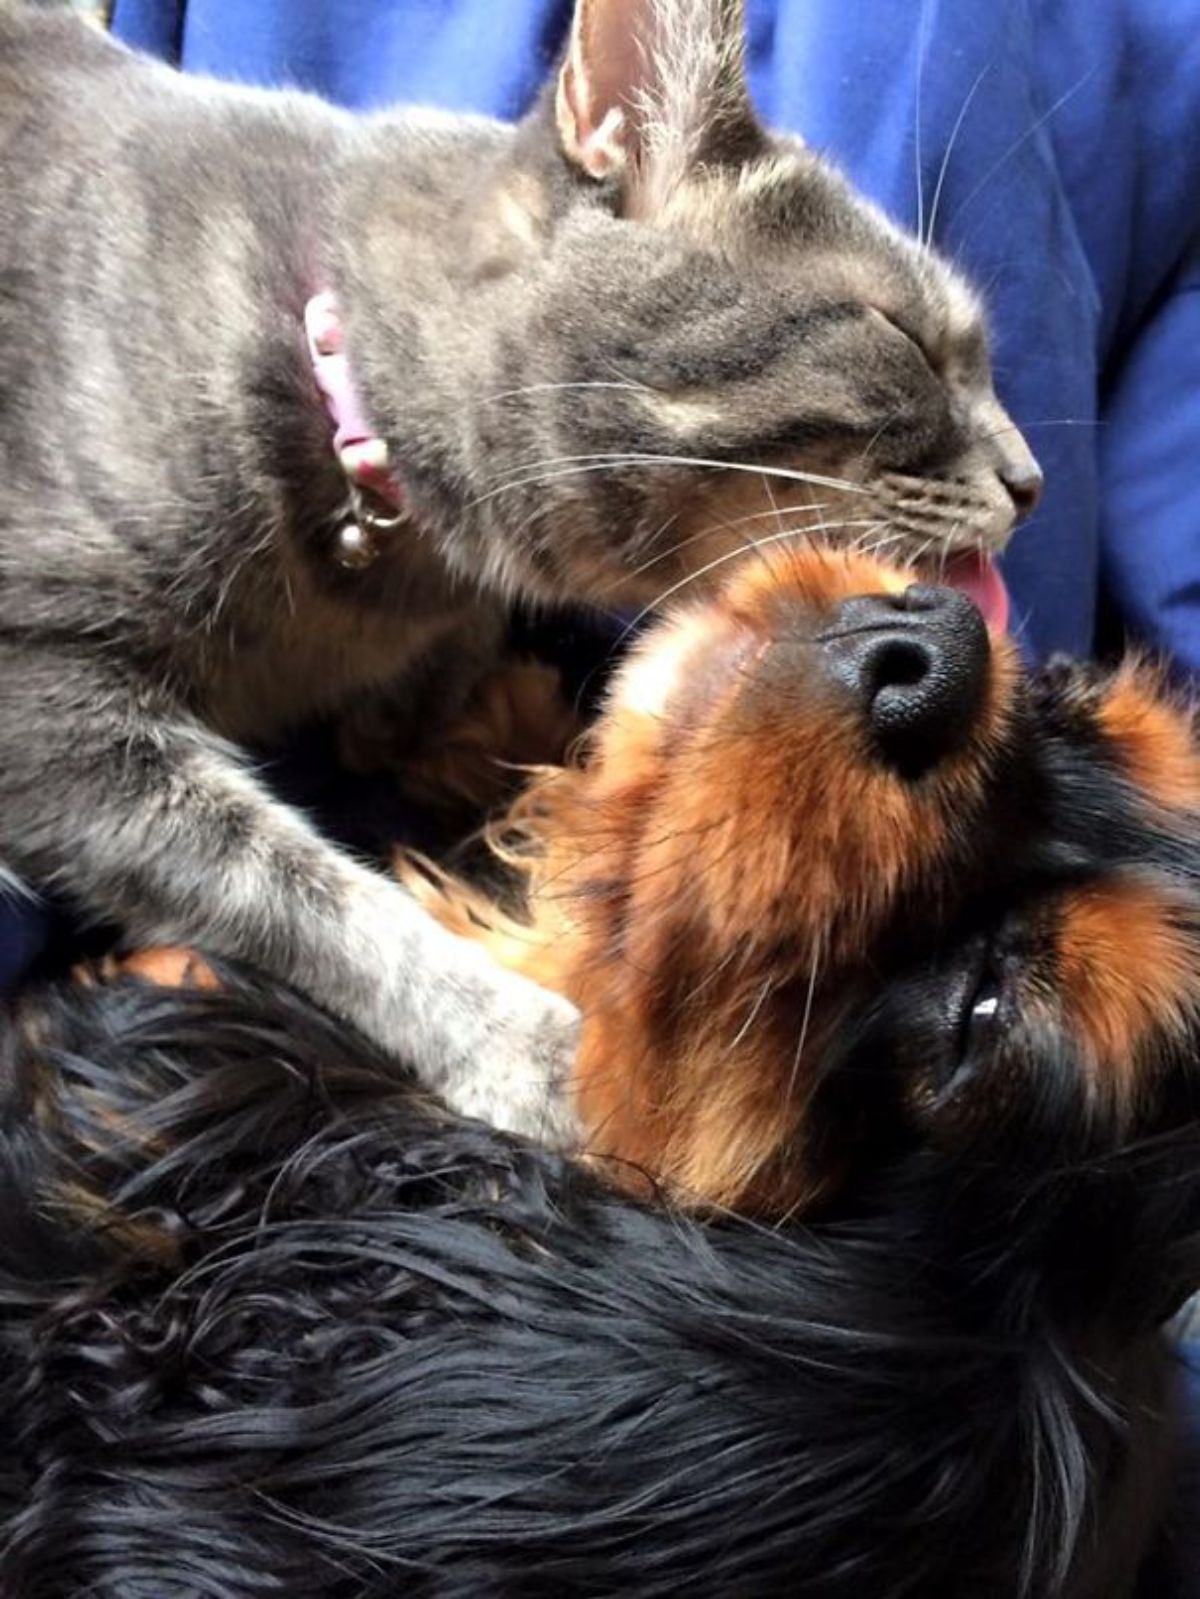 grey and white cat cuddling with a brown and black dog